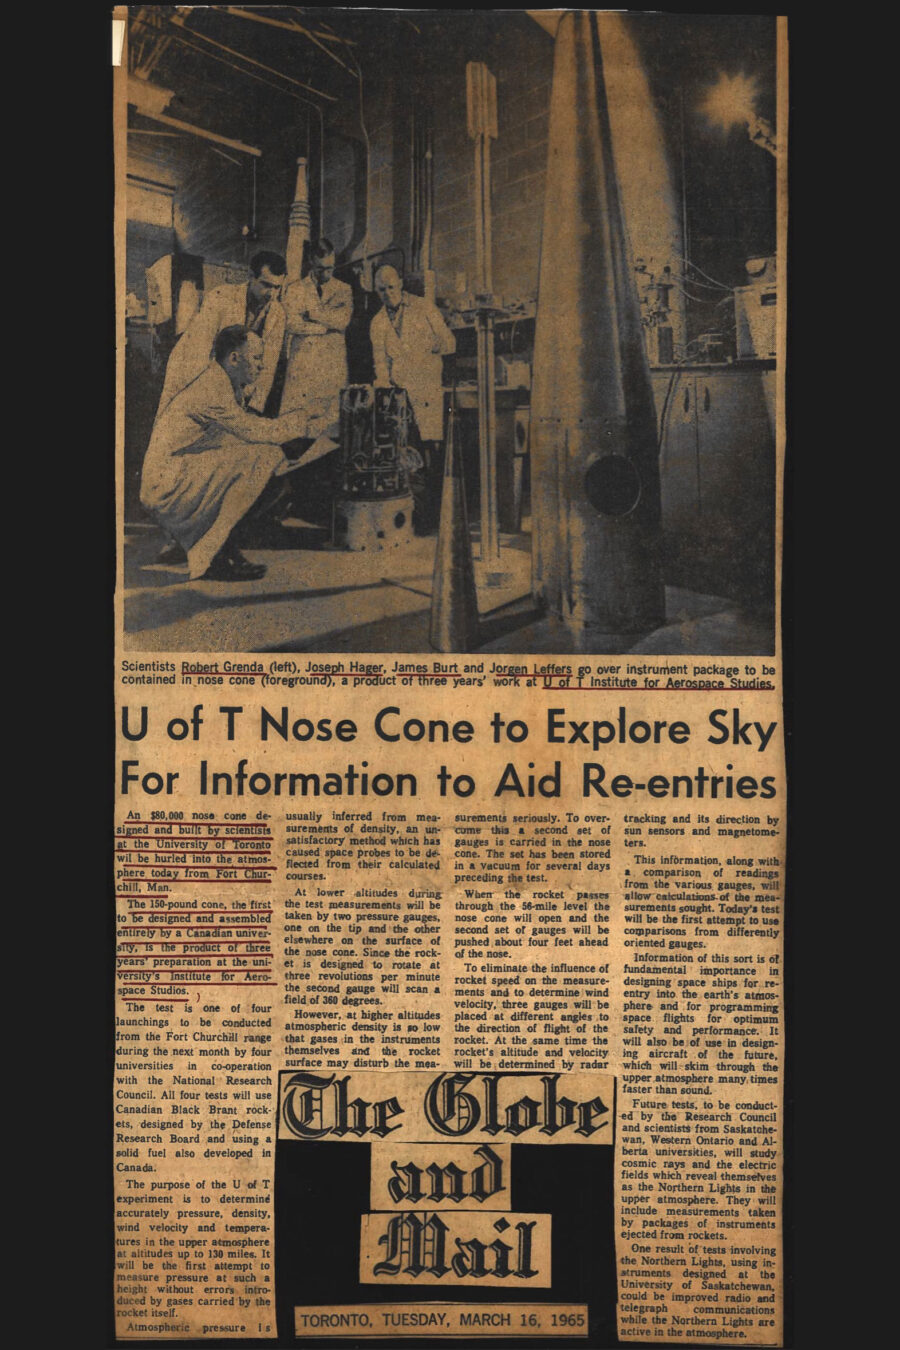 Newspaper clipping from The Globe and Mail, March 16, 1965
Headline: U of T Nose Cone to Explore Sky for Information to Aid Re-entries
Photo in clipping: Four white-coated scientists study the assembly of an electronic instrument package, rocket pieces surrounding them in their lab.
Caption: Scientists Robert Grenda (left), Joseph Hager, James Burt, and Jorgen Leffers go over instrument package to be contained in nose cone (foreground), a product of three years’ work at U of T Institute for Aerospace Studies.
The article describes the launch of an $80,000 nose cone designed by scientists at the University of Toronto. The 150-pound cone, the first to be designed and assembled entirely by a Canadian university, is the product of three years’ preparation at the university’s Institute for Aerospace Studies.
The test is the first of four launchings being conducted from the Fort Churchill range in Manitoba by four universities in co-operation with the National Research Council. All four tests will use Canadian Black Brant rockets, designed by the Defense Research Board and using a solid fuel also developed in Canada.
The purpose of the U of T experiment is to determine accurately pressure, density, wind velocity and temperatures in the upper atmosphere at altitudes up to 130 miles. It will be the first attempt to measure pressure at such a height without errors introduced by gases carried by the rocket itself.
Atmospheric pressure is usually inferred from measurements of density, an unsatisfactory method that has caused space probes to be deflected from their calculated courses. To counter this, at lower altitudes measurements will be taken by two pressure gauges, one on the tip and the other elsewhere on the surface of the nose cone. Since the rocket is designed to rotate three times per minute, the second gauge will scan a field of 360 degrees.
At higher altitudes atmospheric density is so low that gases in the instruments themselves and the rocket surface may disturb the measurements seriously. To overcome this, a second set of gauges that have been stored in vacuum for several days prior are carried in the nose cone. When the rocket passes through the 56-mile level the nose cone will open and the second set of gauges will be pushed about four feet ahead of the nose.
To eliminate the influence of rocket speed on the measurements and to determine wind velocity, three gauges will be placed at different angles to the direction of flight of the rocket. At the same time the rocket’s altitude and velocity will be determined by radar tracking and its direction by sun sensors and magnetometers.
This information, along with a comparison of readings from the various gauges, will allow calculations of the measurements sought. Today’s test will be the first attempt to use comparisons from differently oriented gauges.
Information of this sort is fundamental when designing space ships for re-entry into the earth’s atmosphere and for programming space flights for optimum safety and performance. It will also be of use in designing aircraft of the future, which will skim through the atmosphere many times faster than sound.
Future tests will study cosmic rays and the electric fields which reveal themselves as the Northern Lights in the upper atmosphere. They will include measurements taken by packages of instruments ejected from rockets.